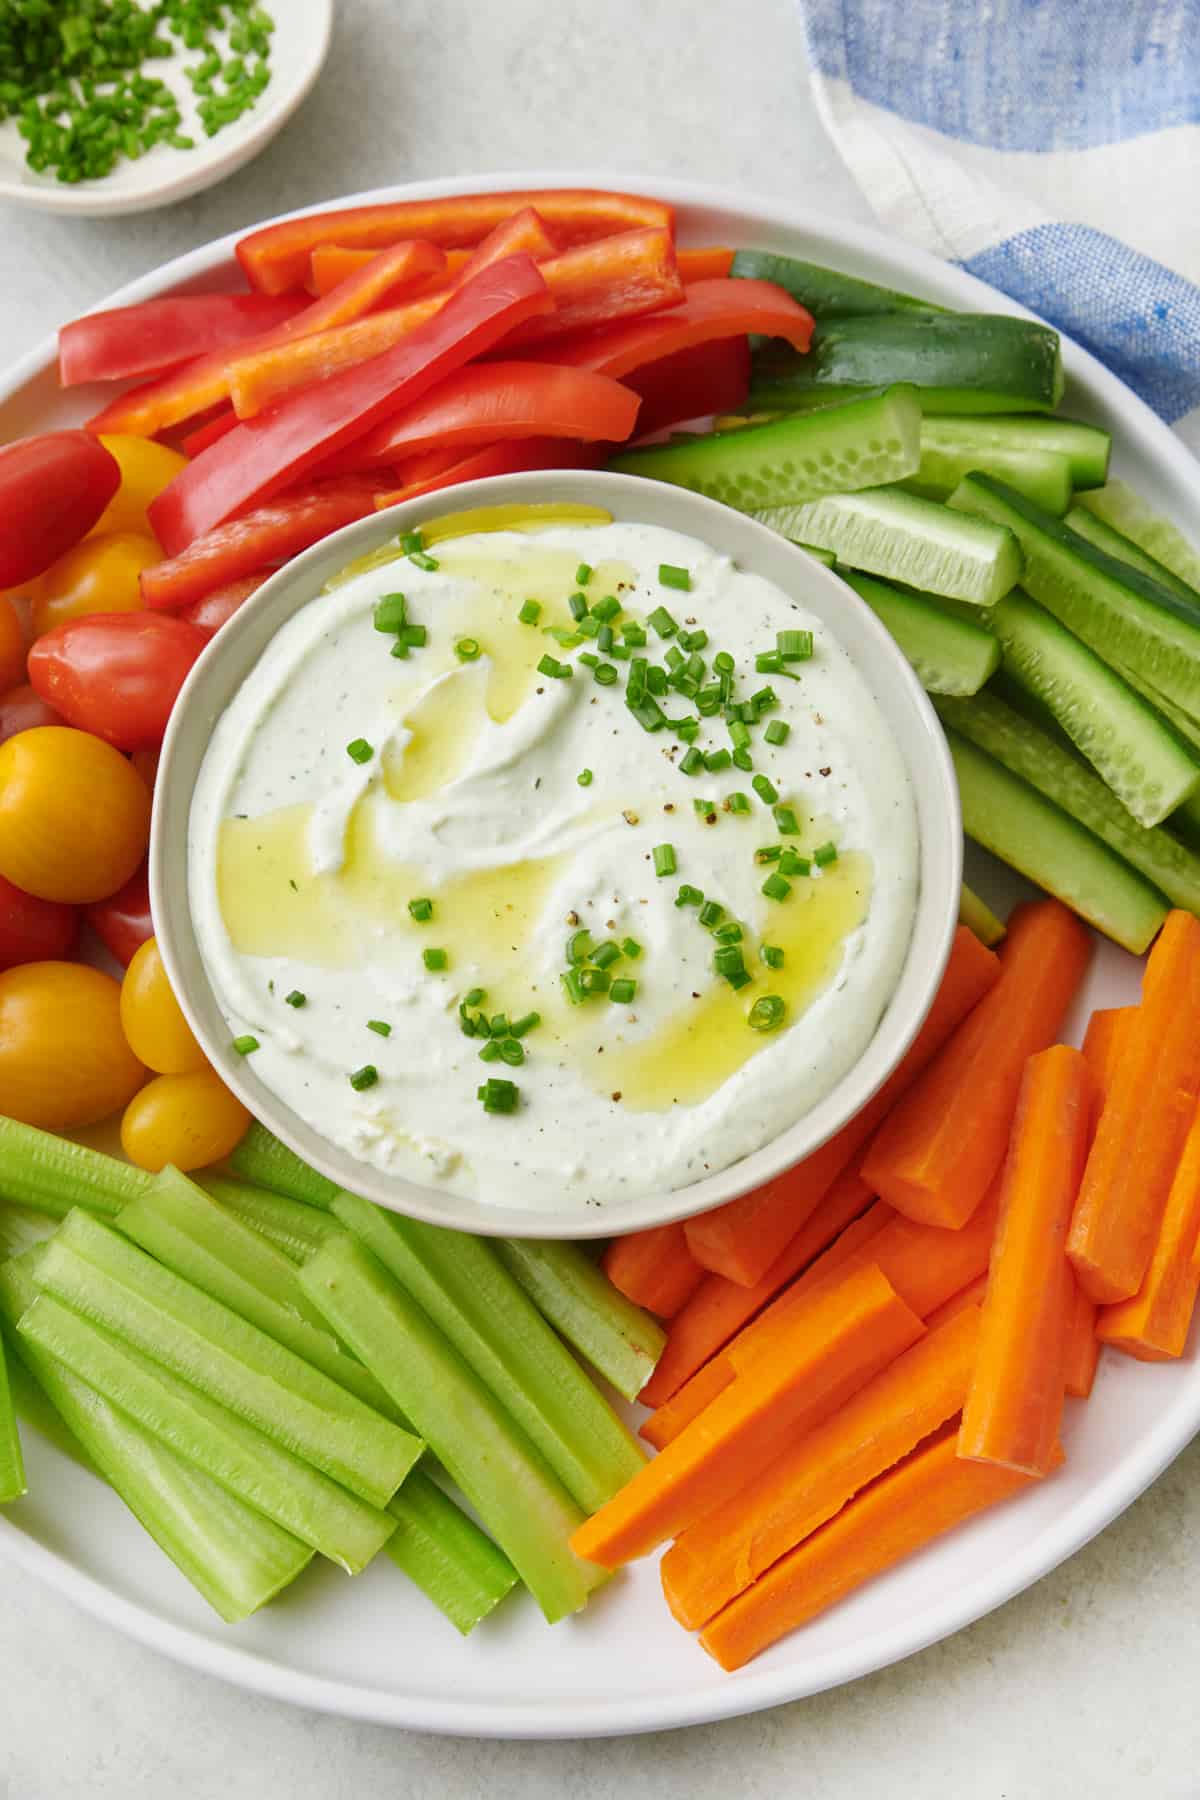 Close shot of a platter of fresh vegetables cut into sticks for dipping into a bowl of whipped cottage cheese garnished with chives and oil.